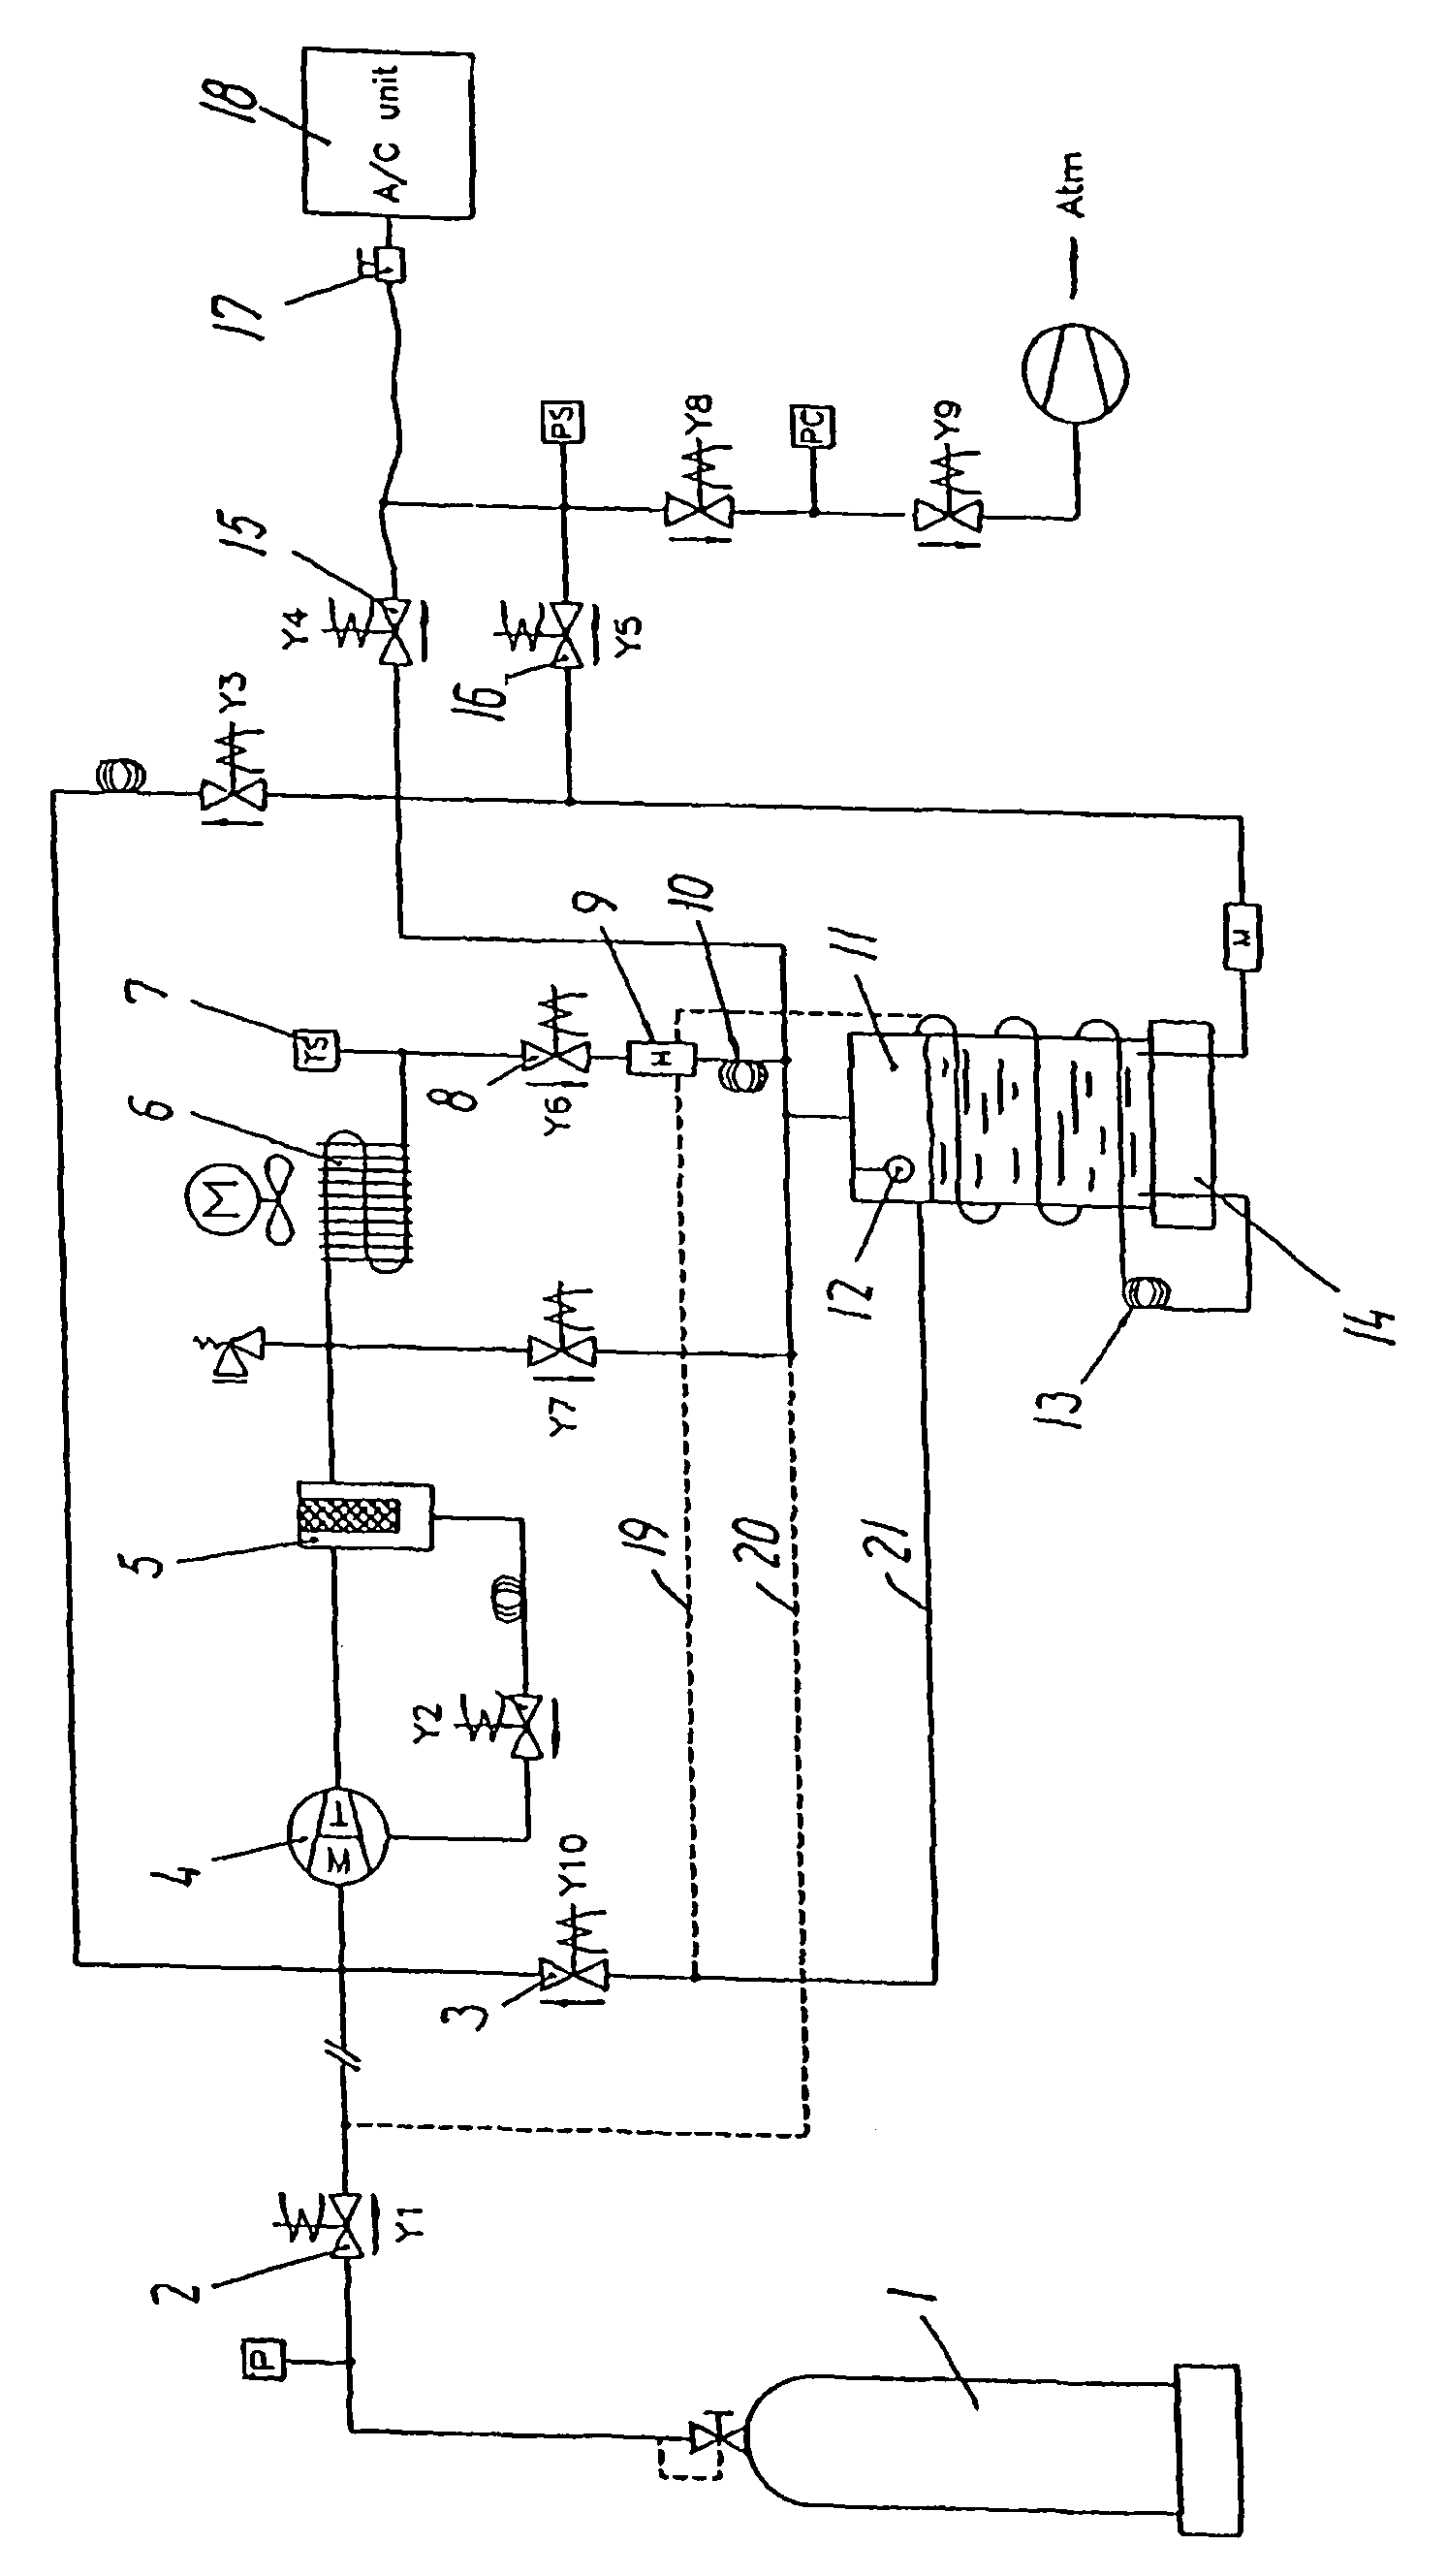 Method and a system for filling a refrigeration system with refrigerant